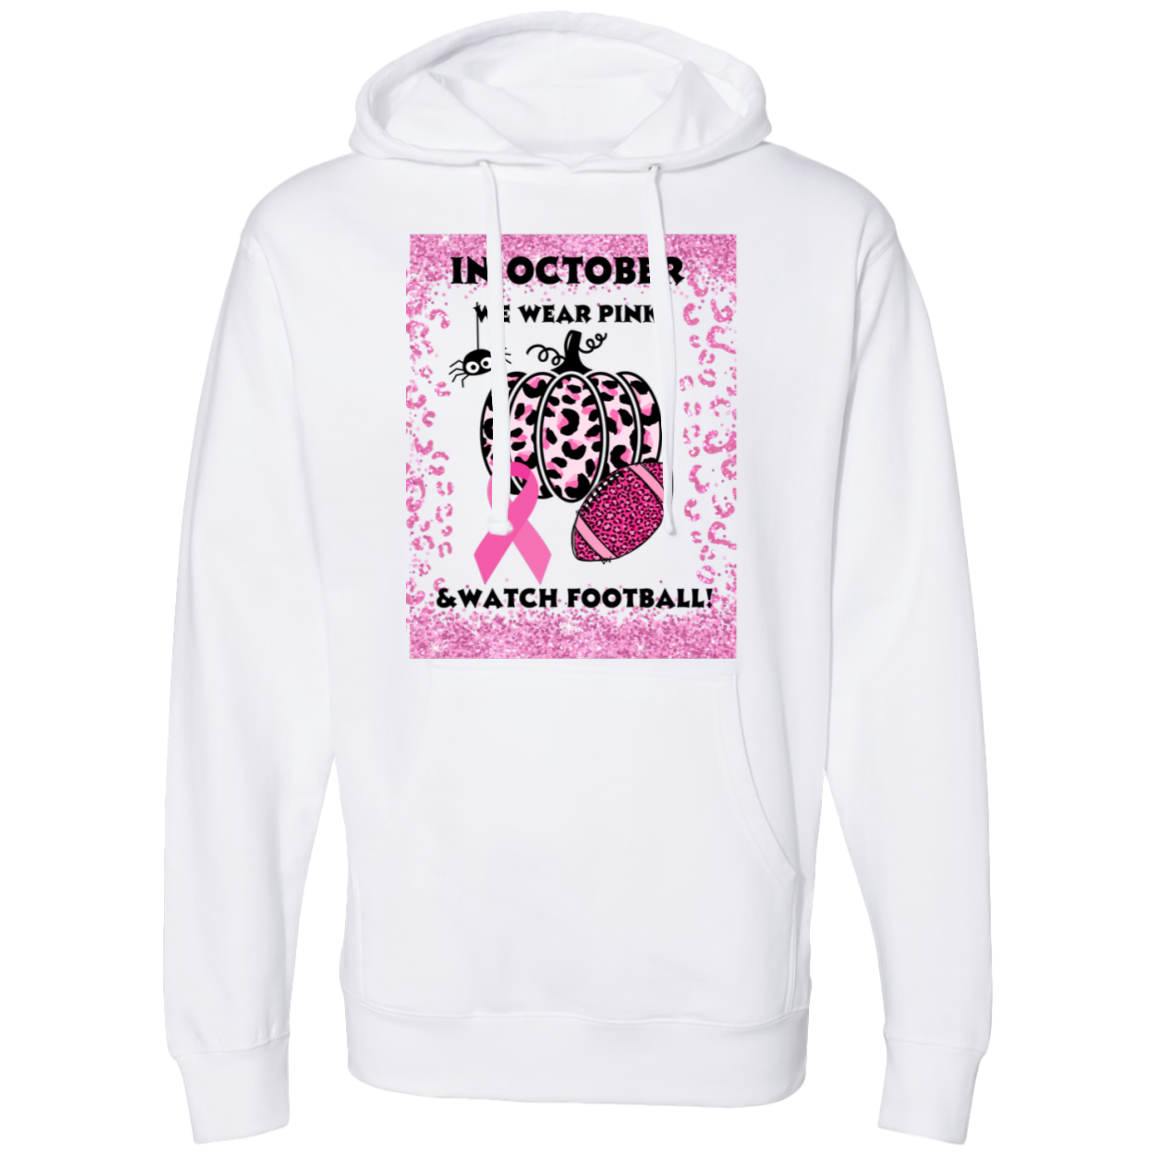 Price drop to support Breast Cancer Awareness! In October we wear pink & watch football Midweight Hooded Sweatshirt